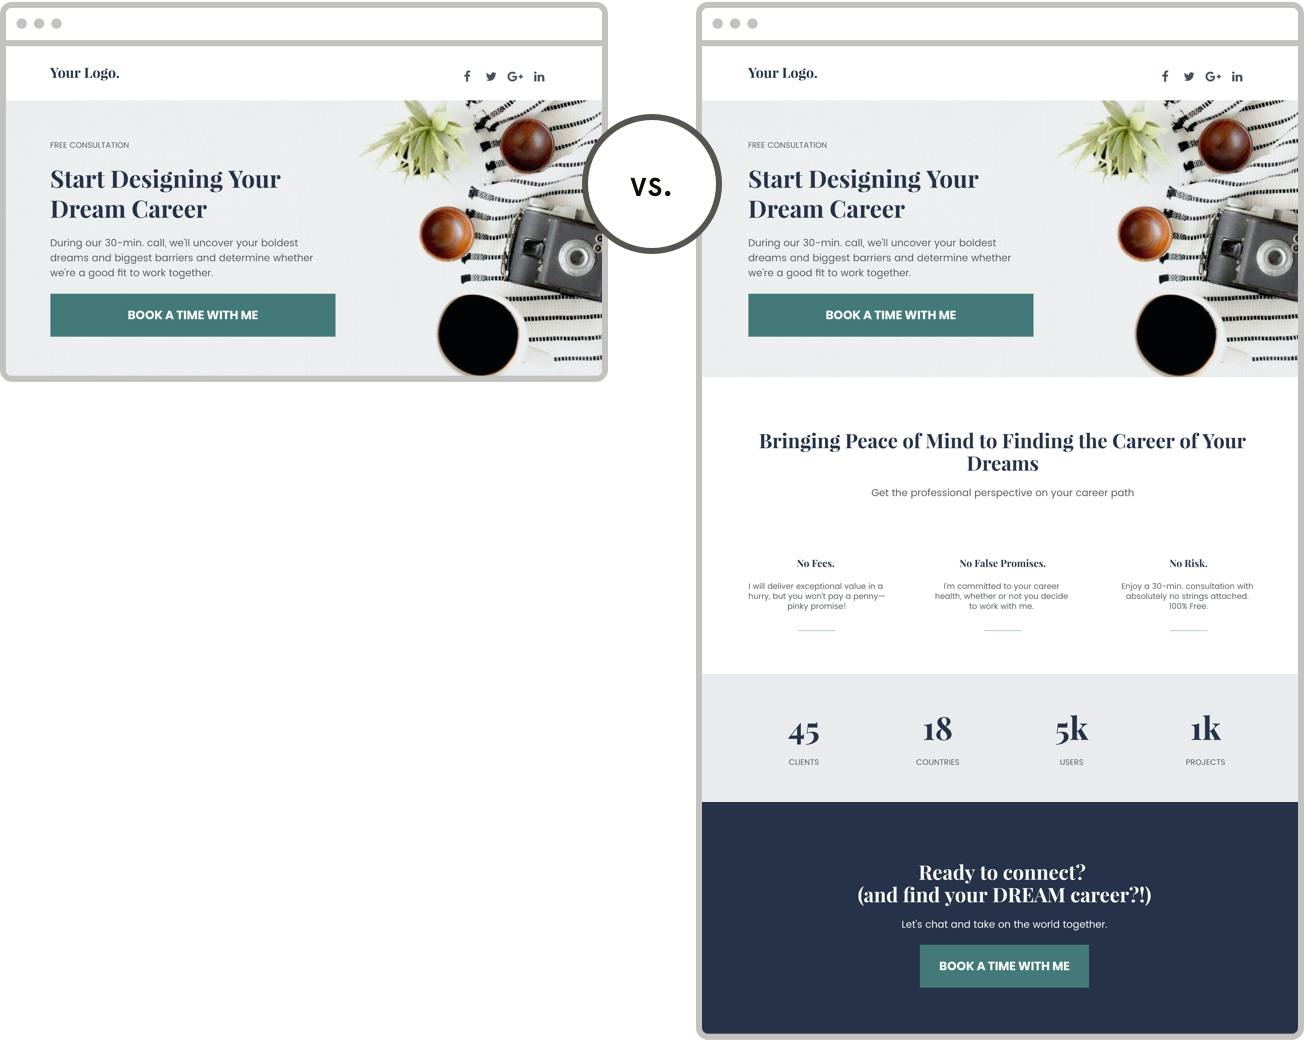 How to do A/B Testing